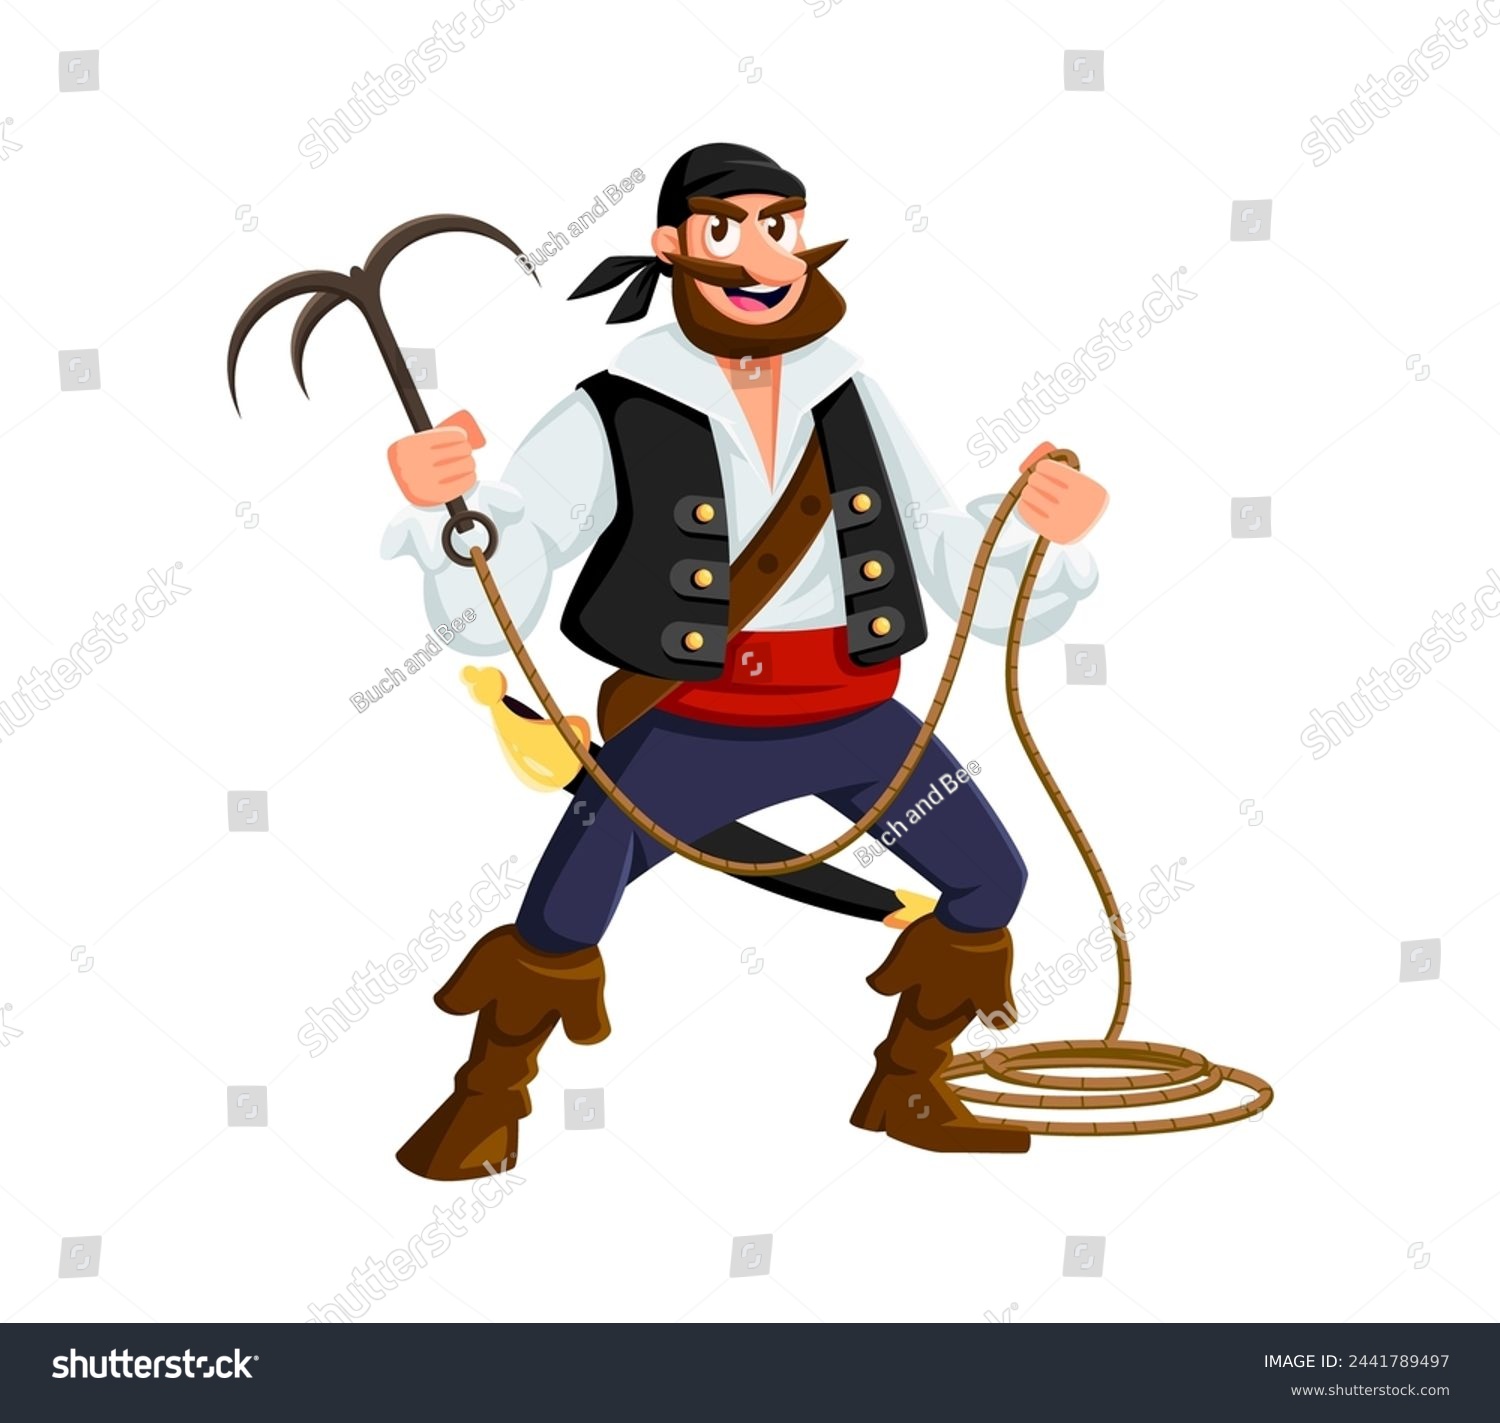 SVG of Cartoon pirate sailor character with grappling hook. Isolated vector swashbuckling corsair, adventurous bearded buccaneer in vest and bandana, ready for robbery and boarding ships in the high sea svg